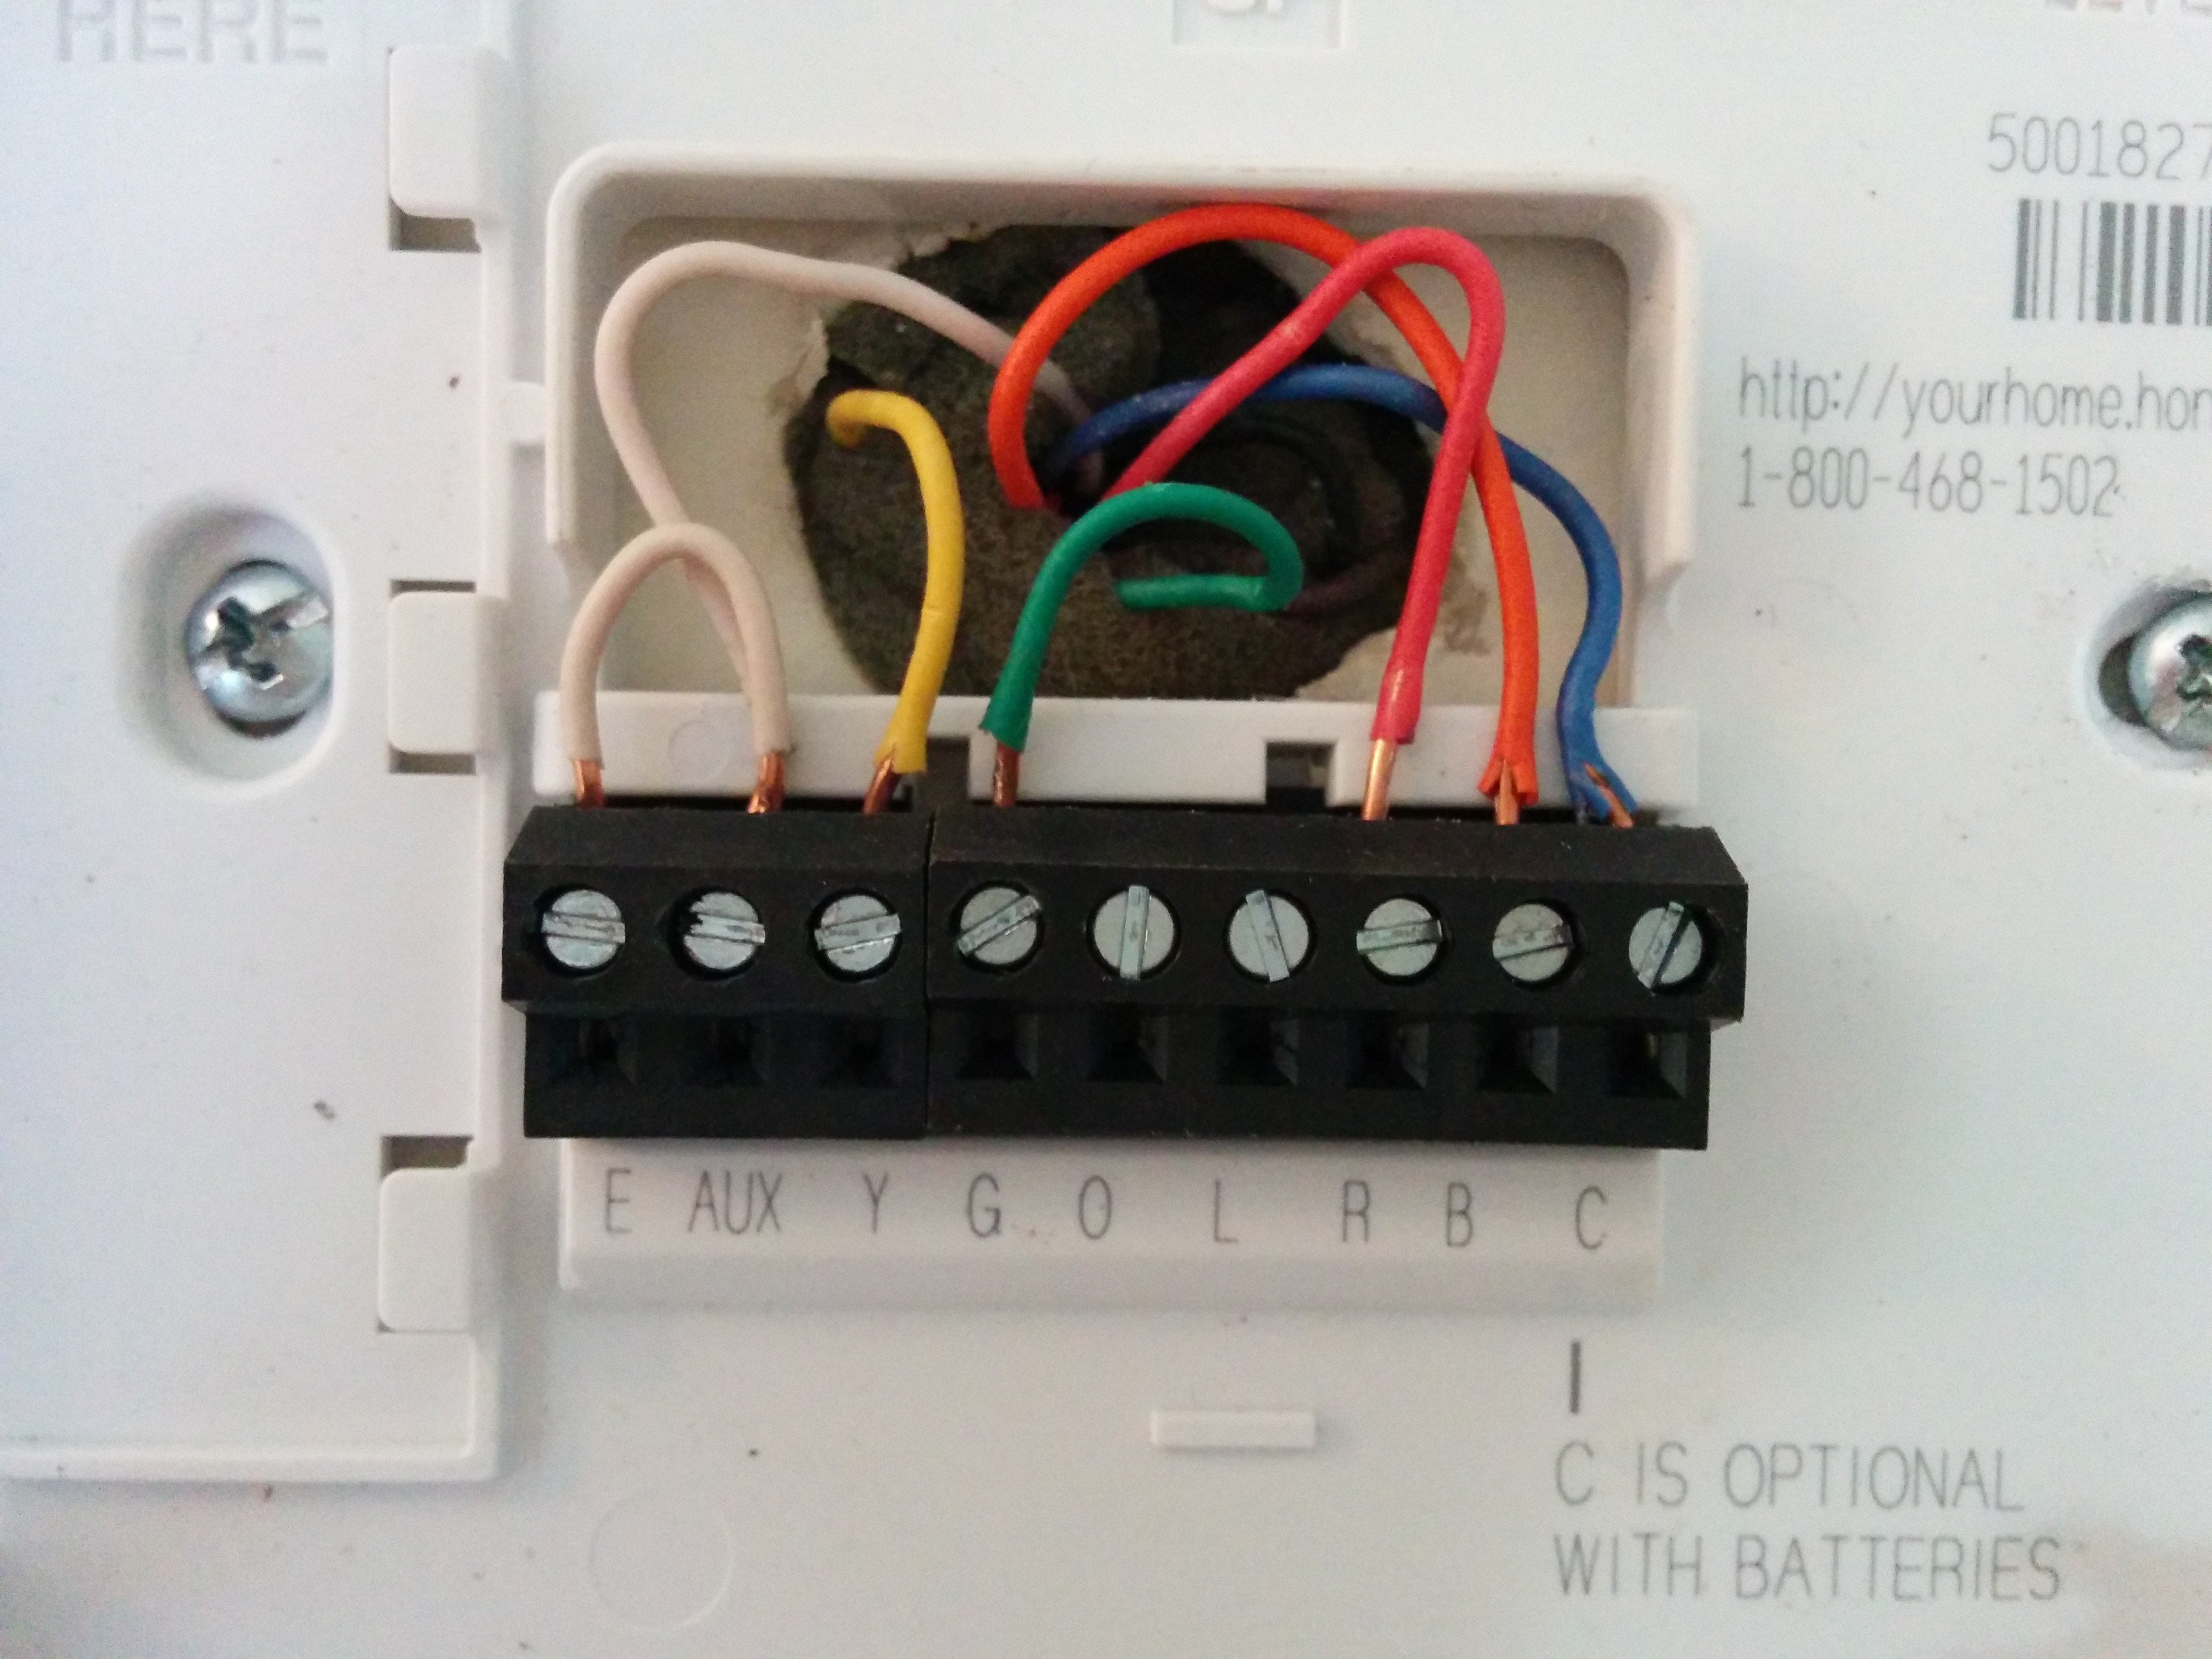 Wiring Diagram Honeywell thermostat Th5110d1006 New Honeywell Digital thermostat Th3110d1008 Wiring Diagram Wiring